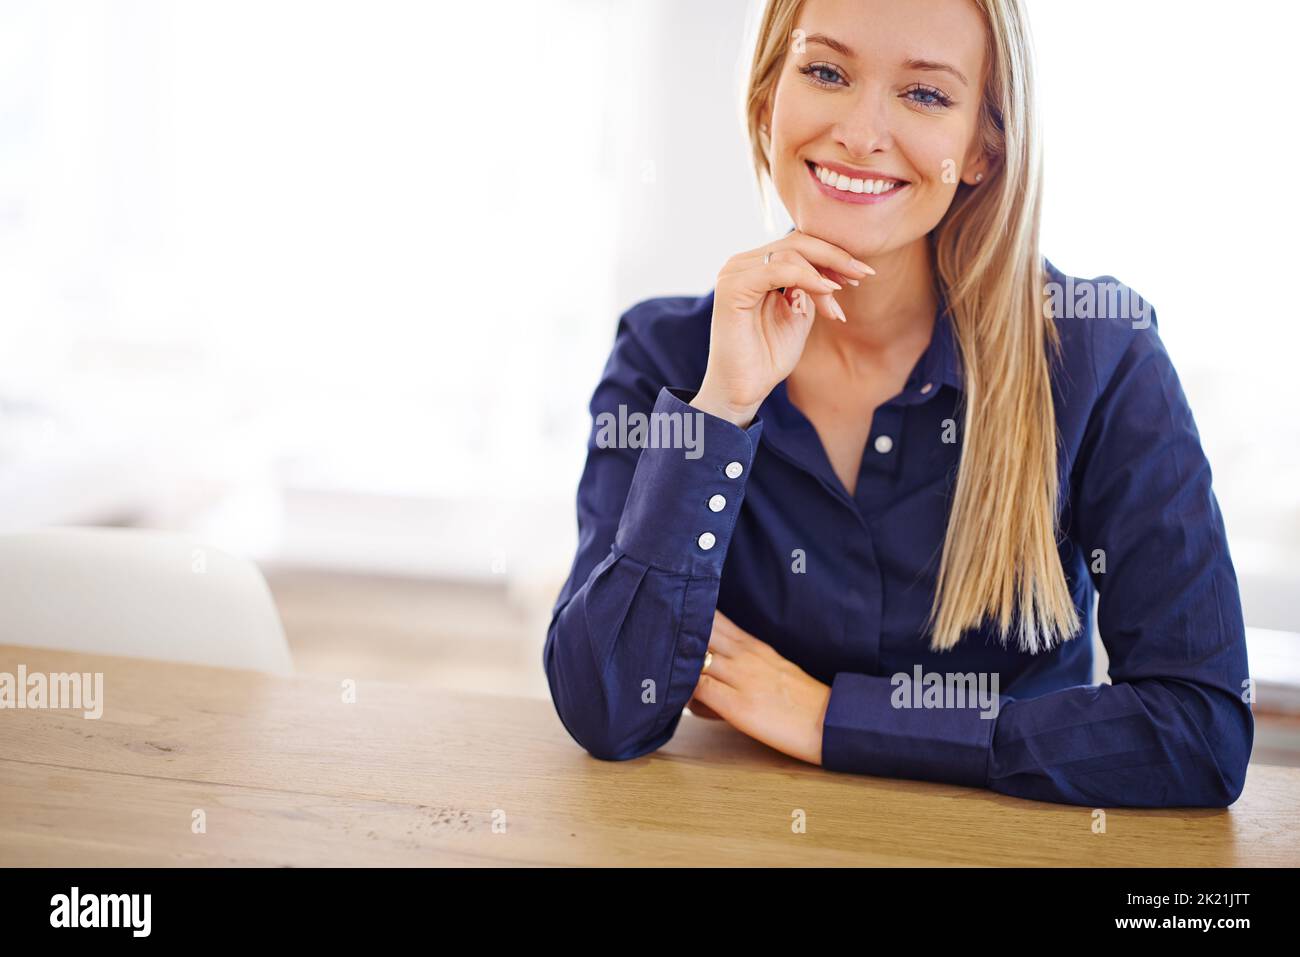 Self-assured and successful. well dressed woman looking at the camera. Stock Photo